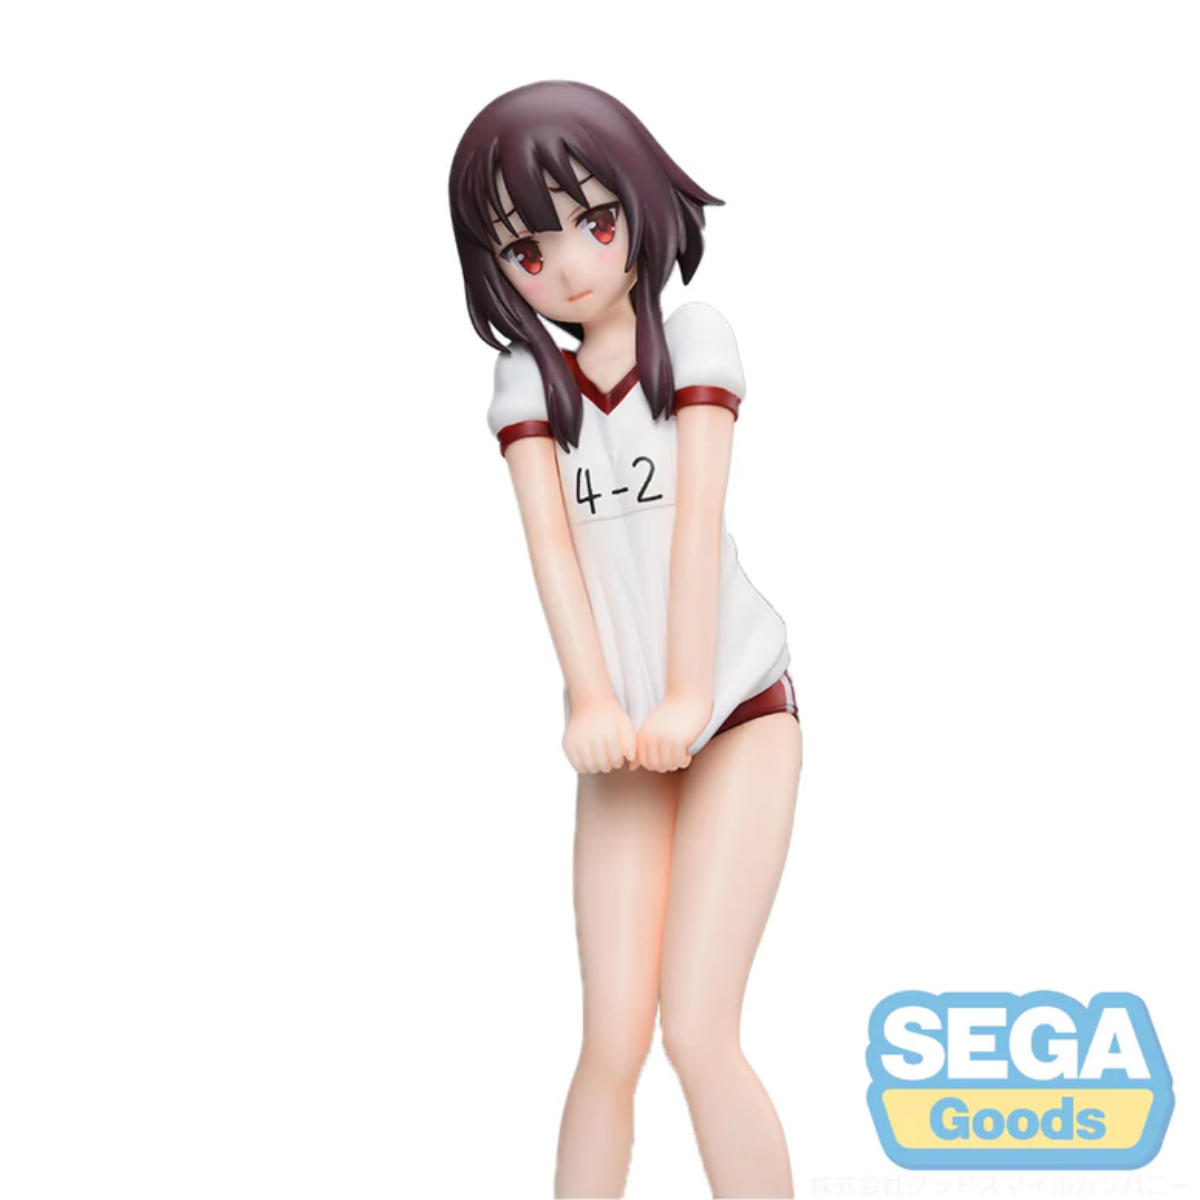 Konosuba God's Blessing On This Wonderful World! 2 SPM Figure "Megumin" (Gym Clothes Ver.)-Sega-Ace Cards & Collectibles